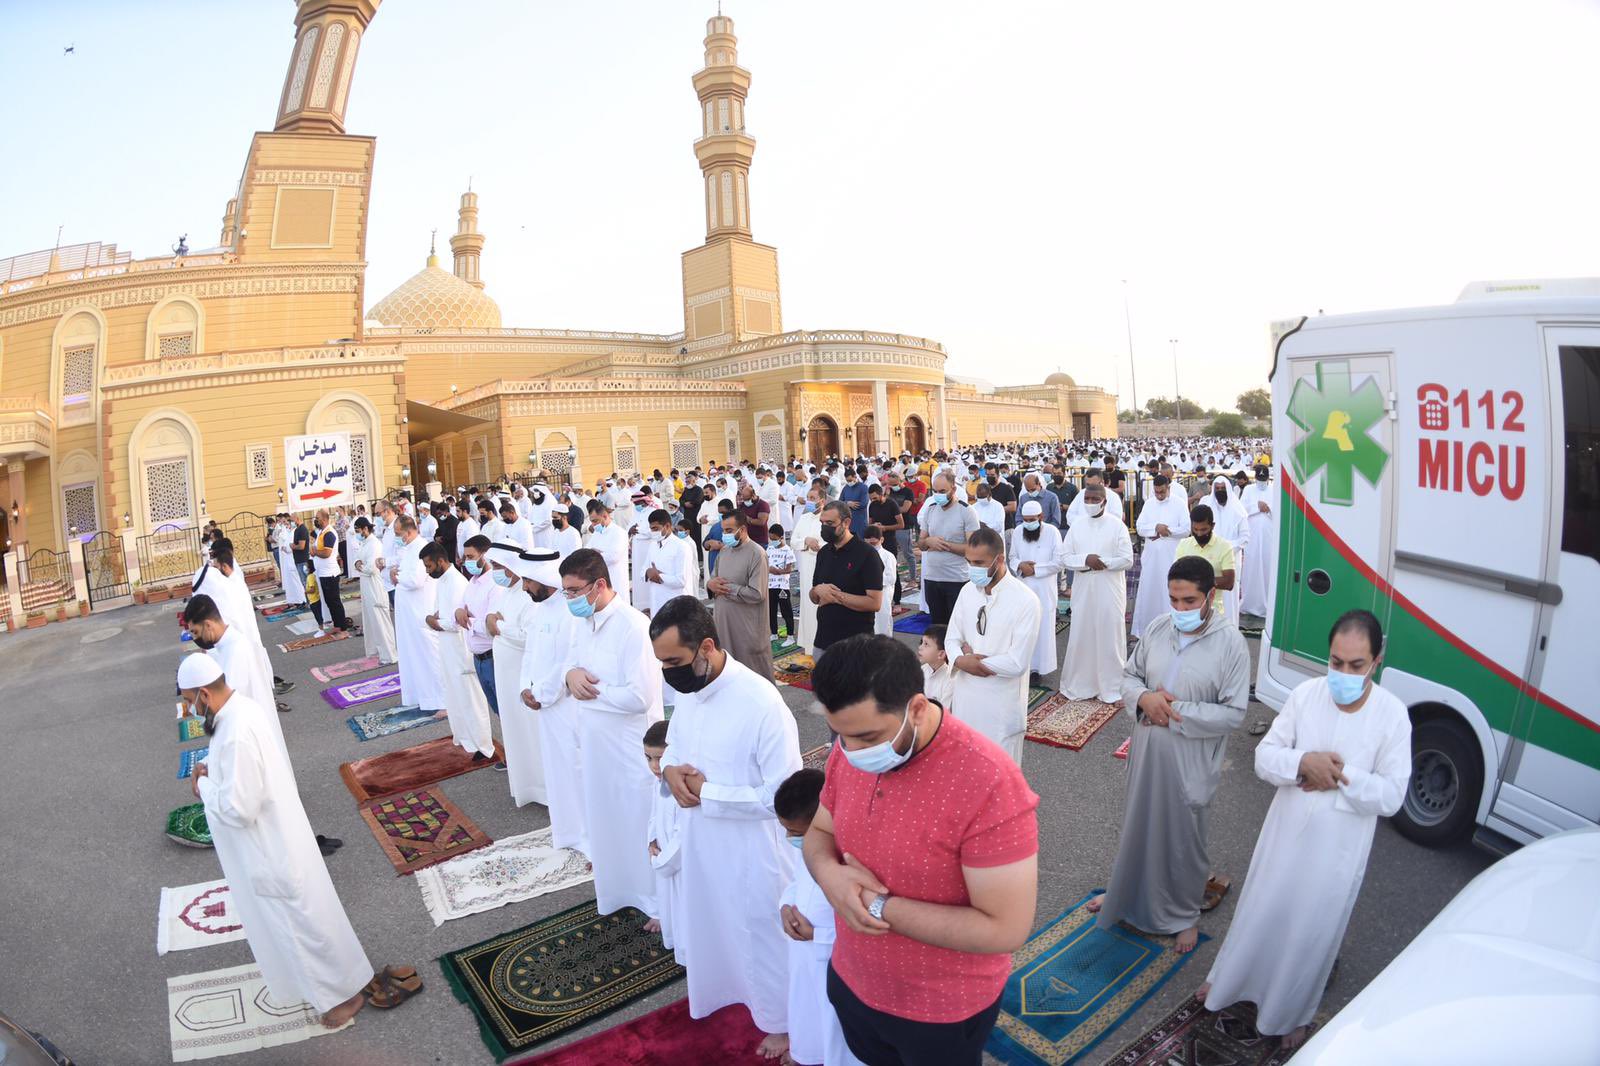 MoH urges citizens to abide by health precautions during Eid